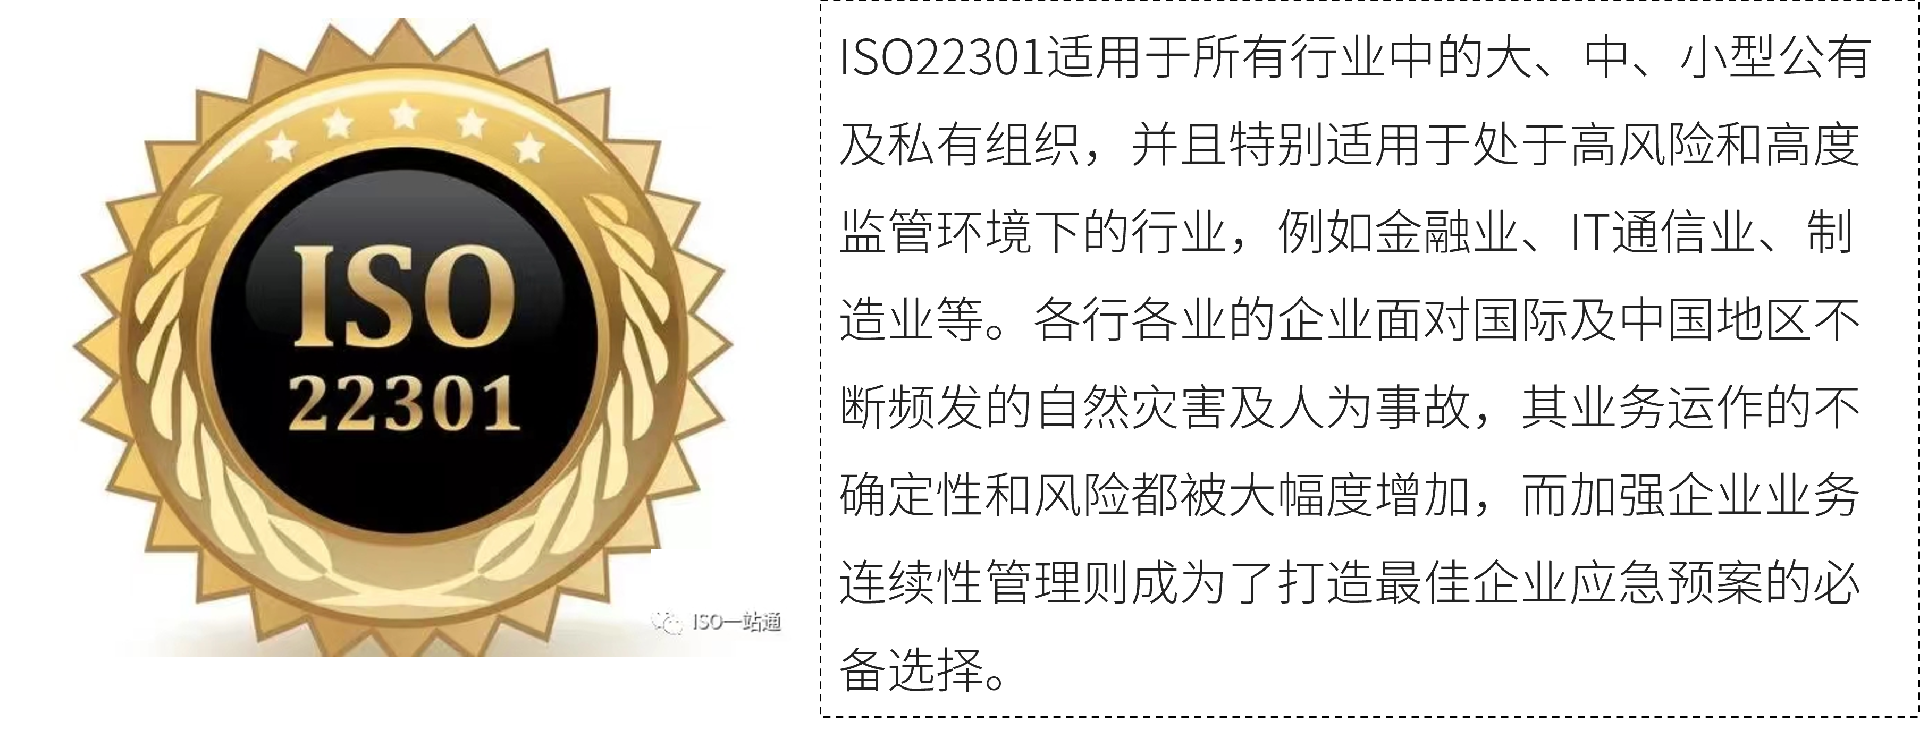 ISO22301的适用对象.png